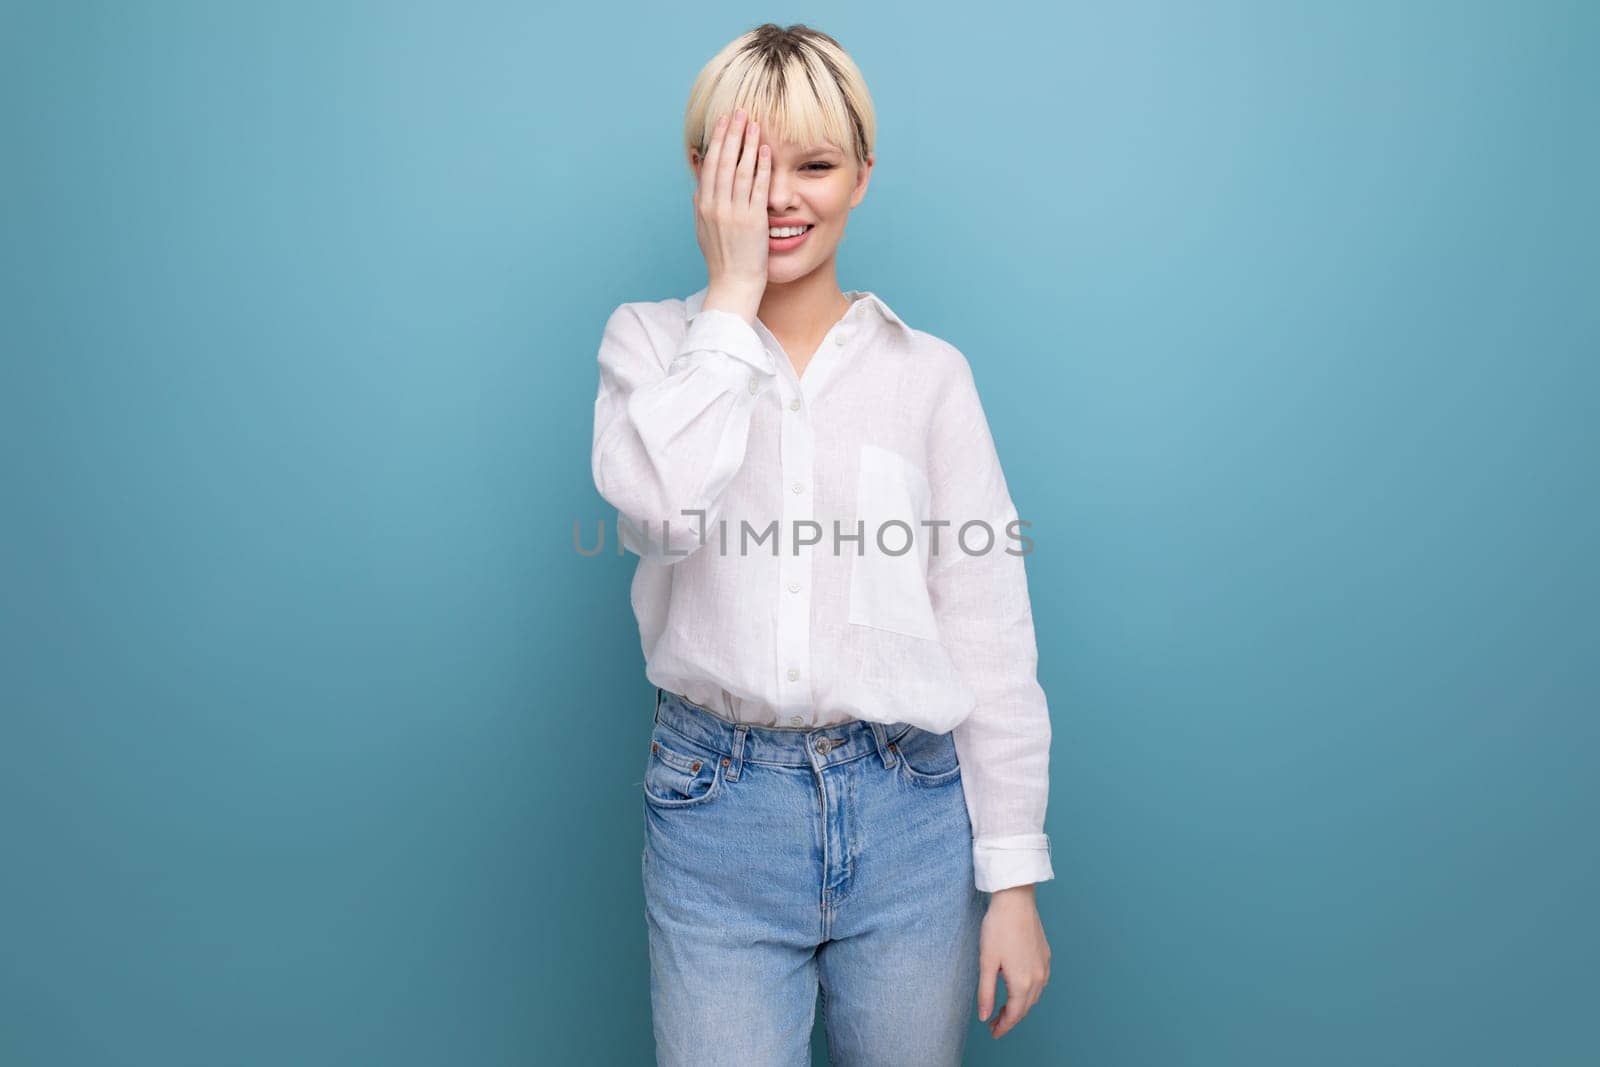 portrait of a young pretty blond secretary woman dressed in a white blouse on a blue background with copy space.